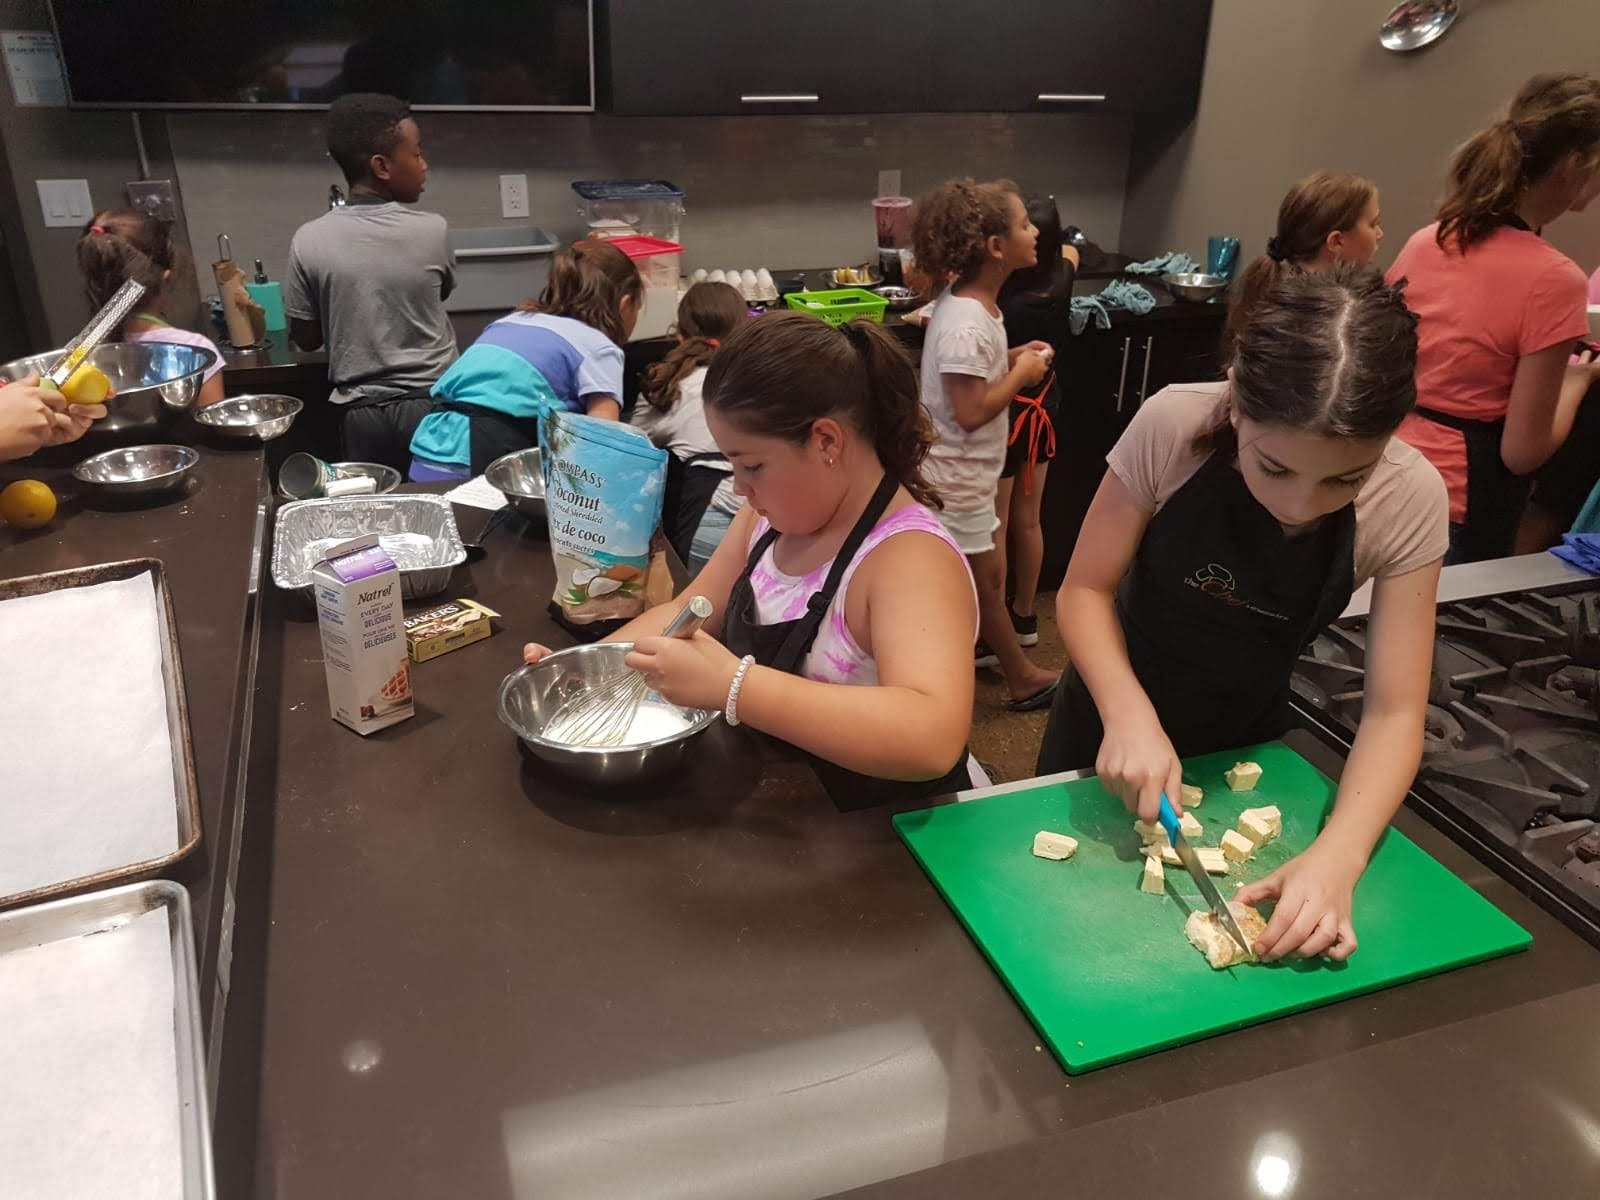 Midtown - Teen Cooking Classes - 4 week Spring Session - Tuesday May 31 – Tuesday June 21 2022